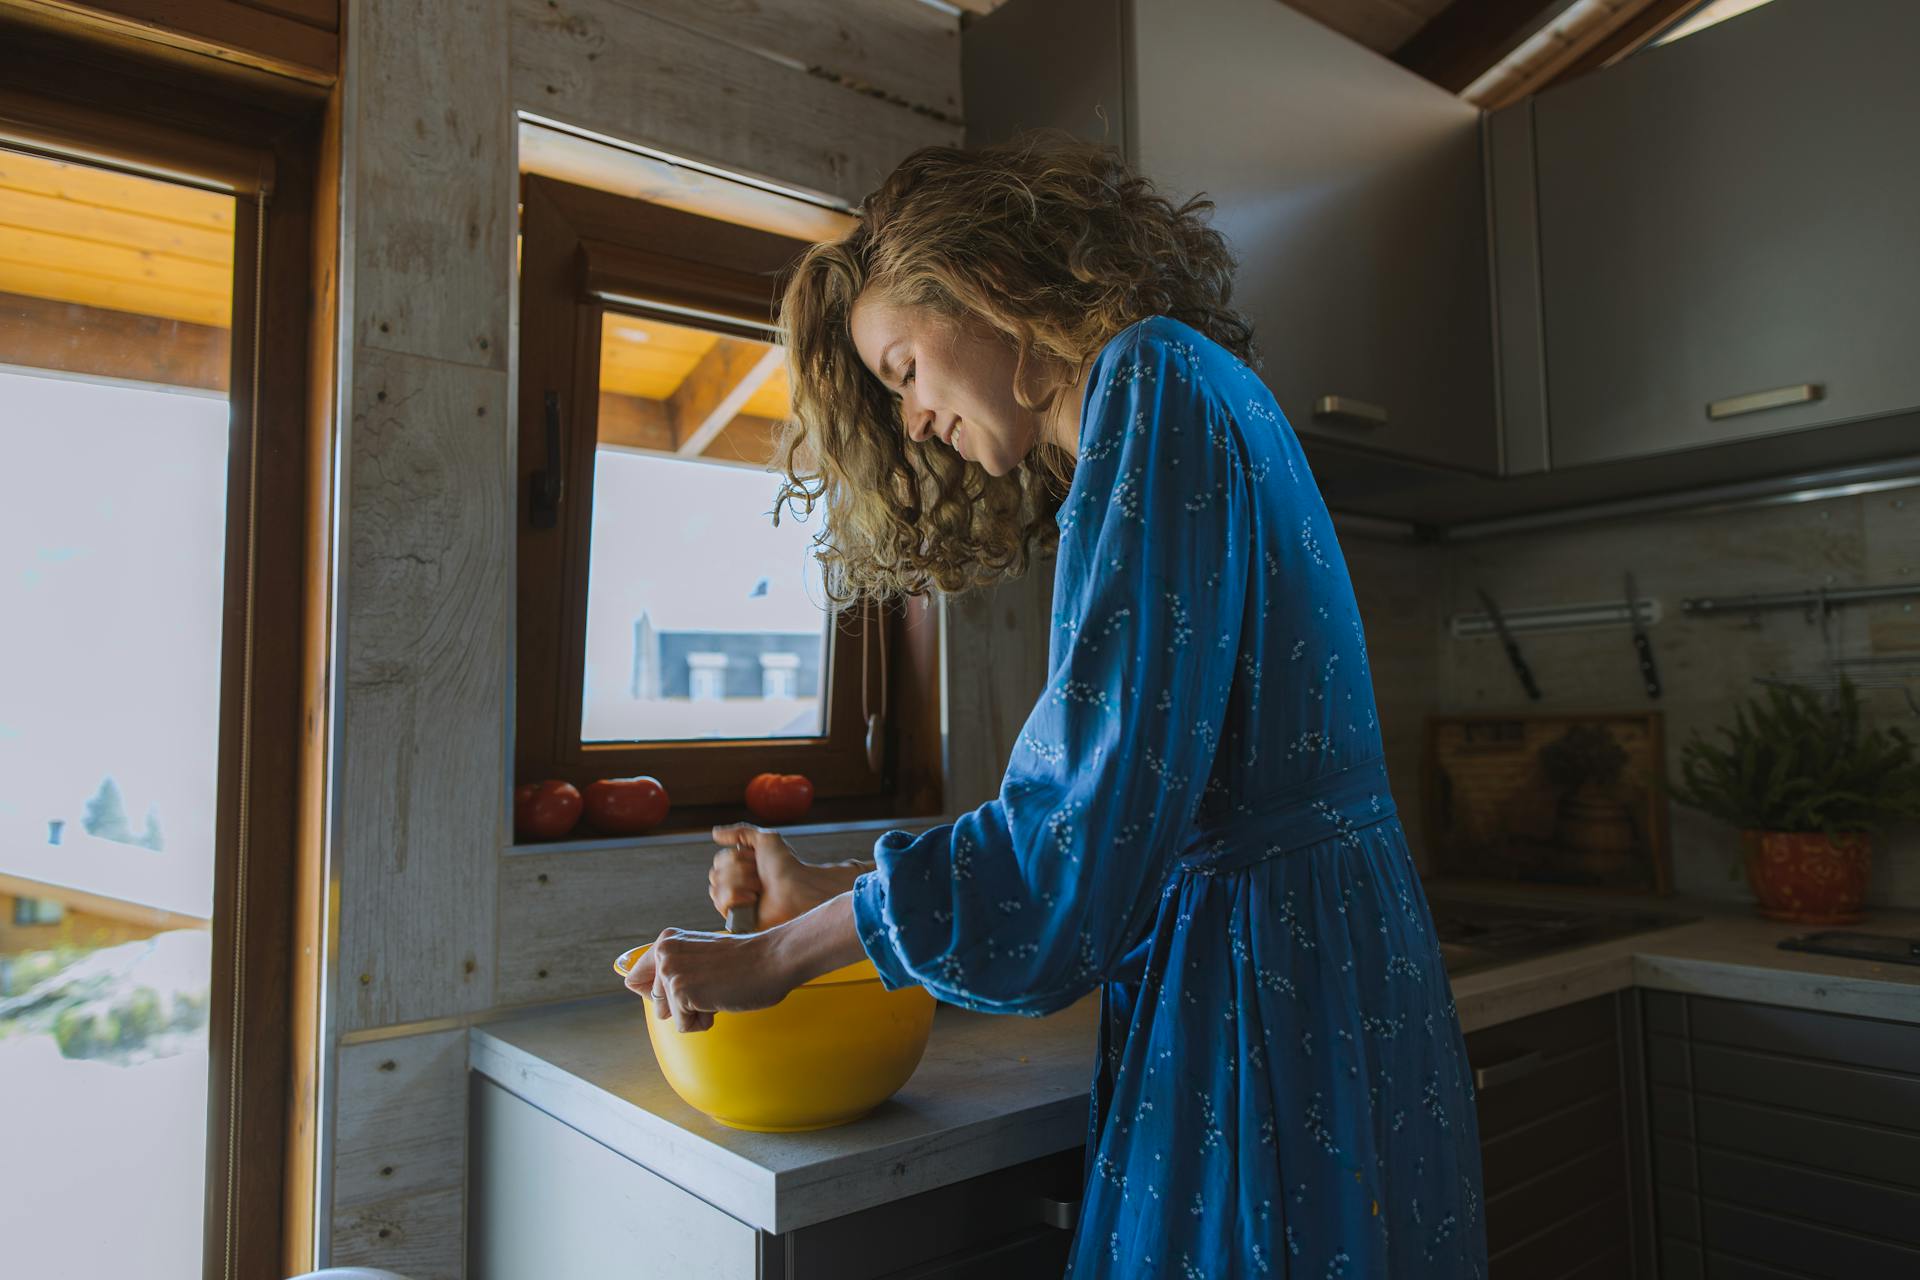 A smiling woman holding a yellow ball in a kitchen | Source: Pexels